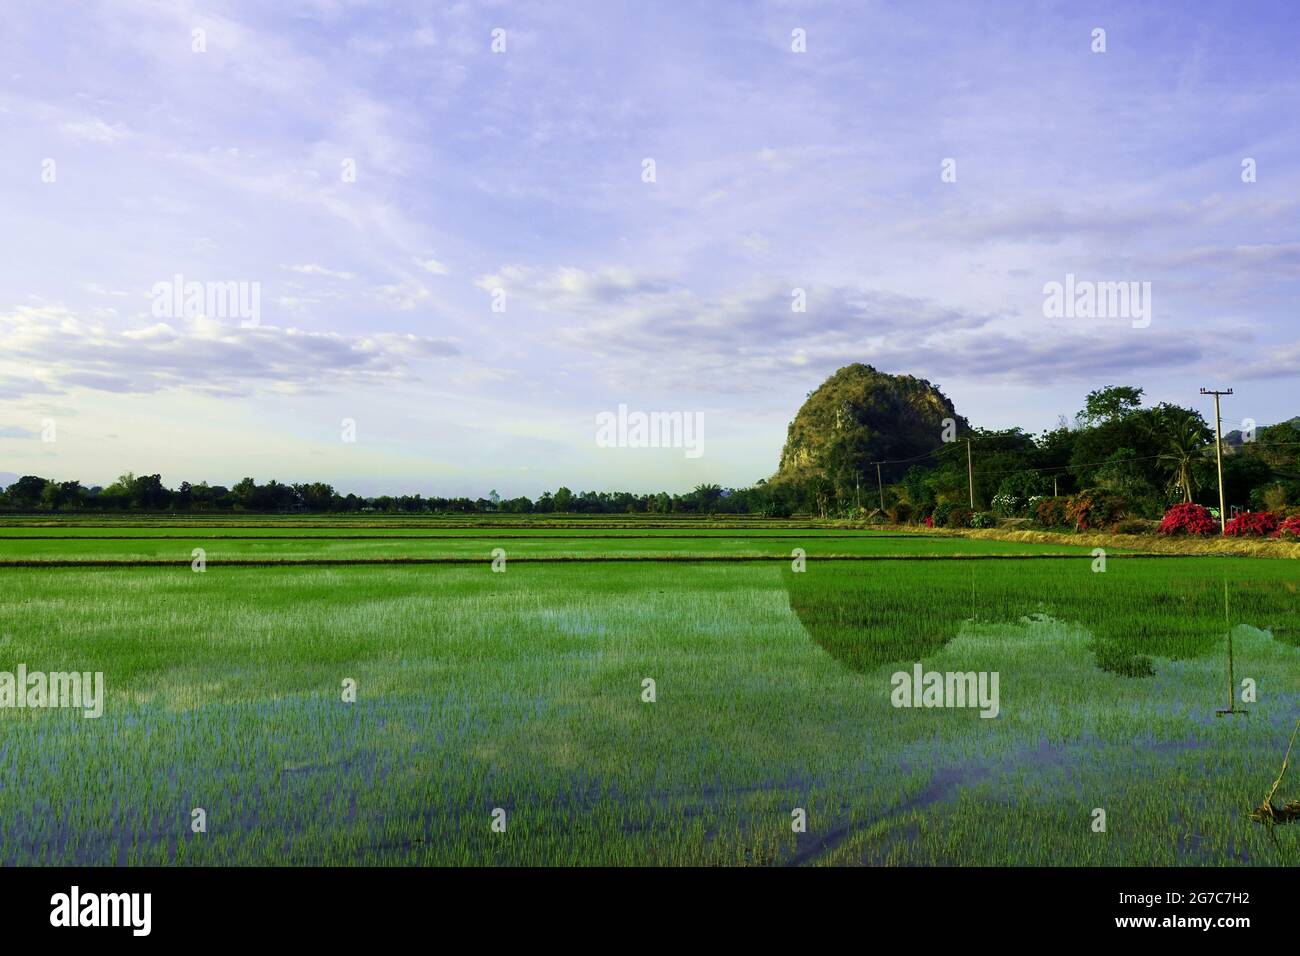 Rice paddy field with a mountain in the background and a reflection of it on the surface of the field. Stock Photo